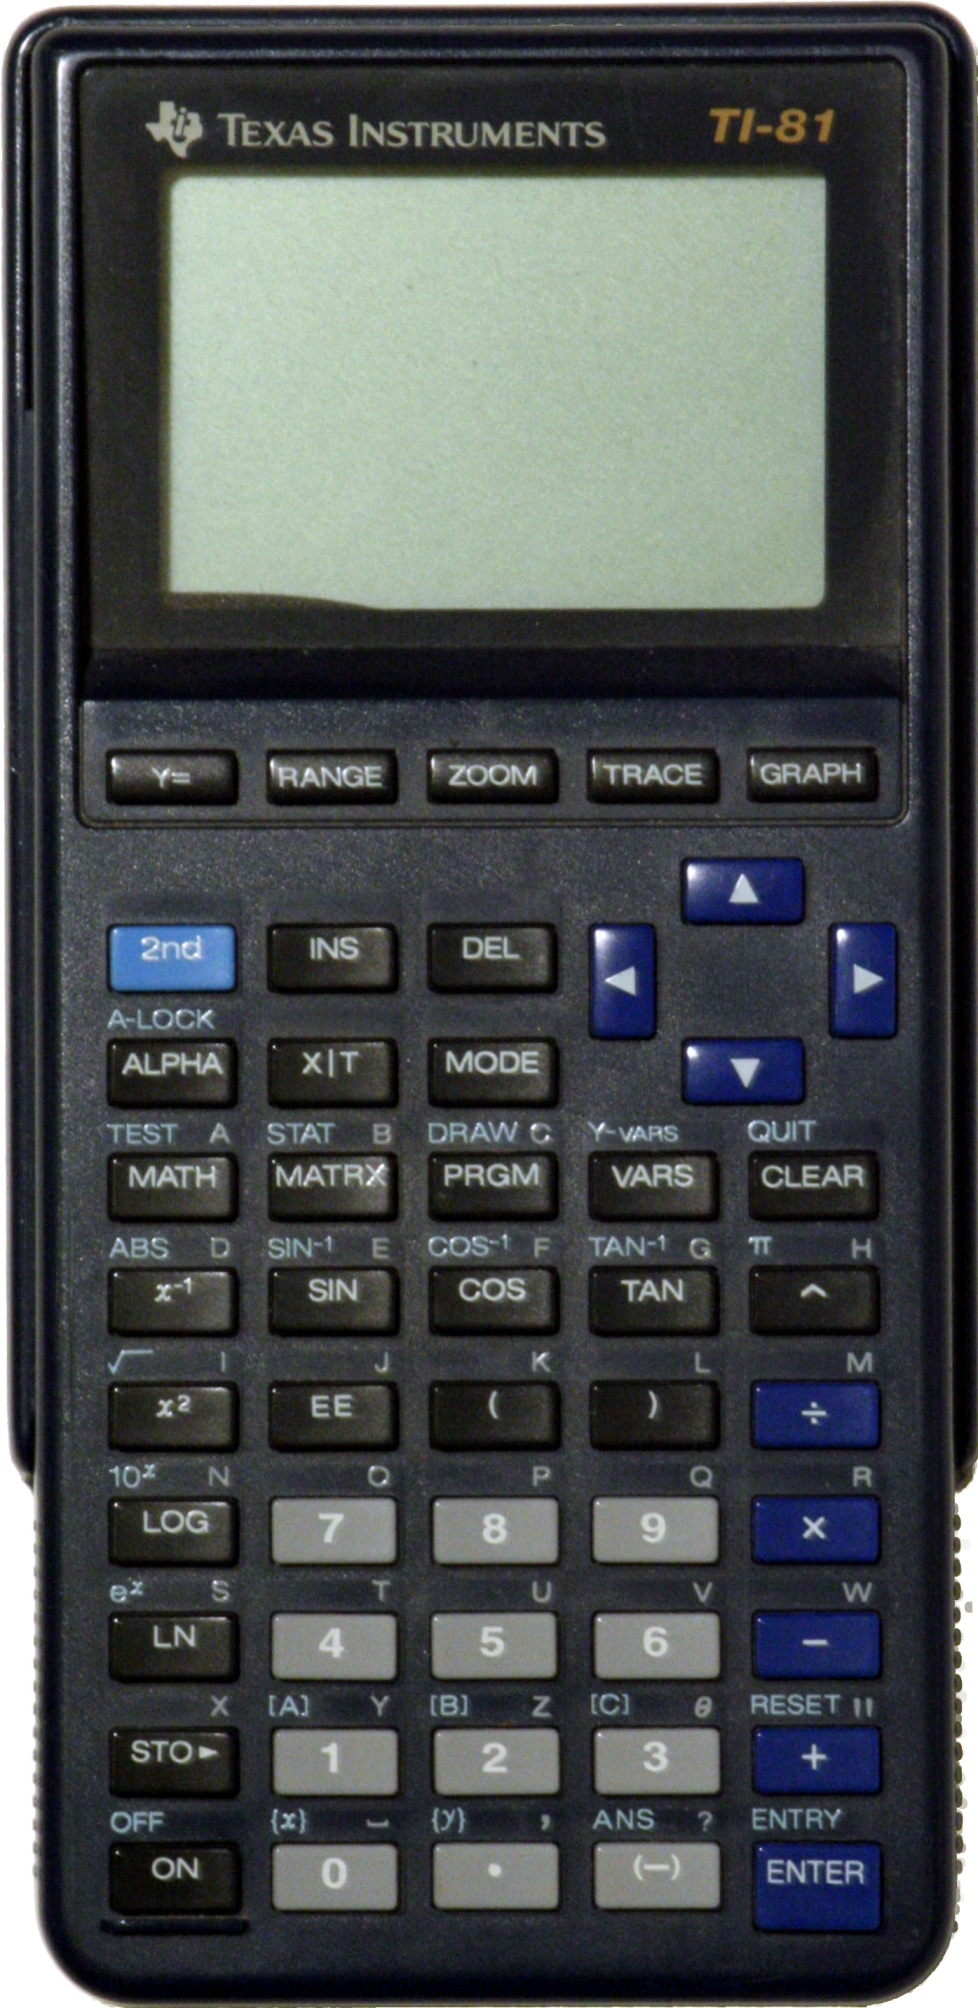 Texas Instruments 81 Graphing Calculator for sale online 